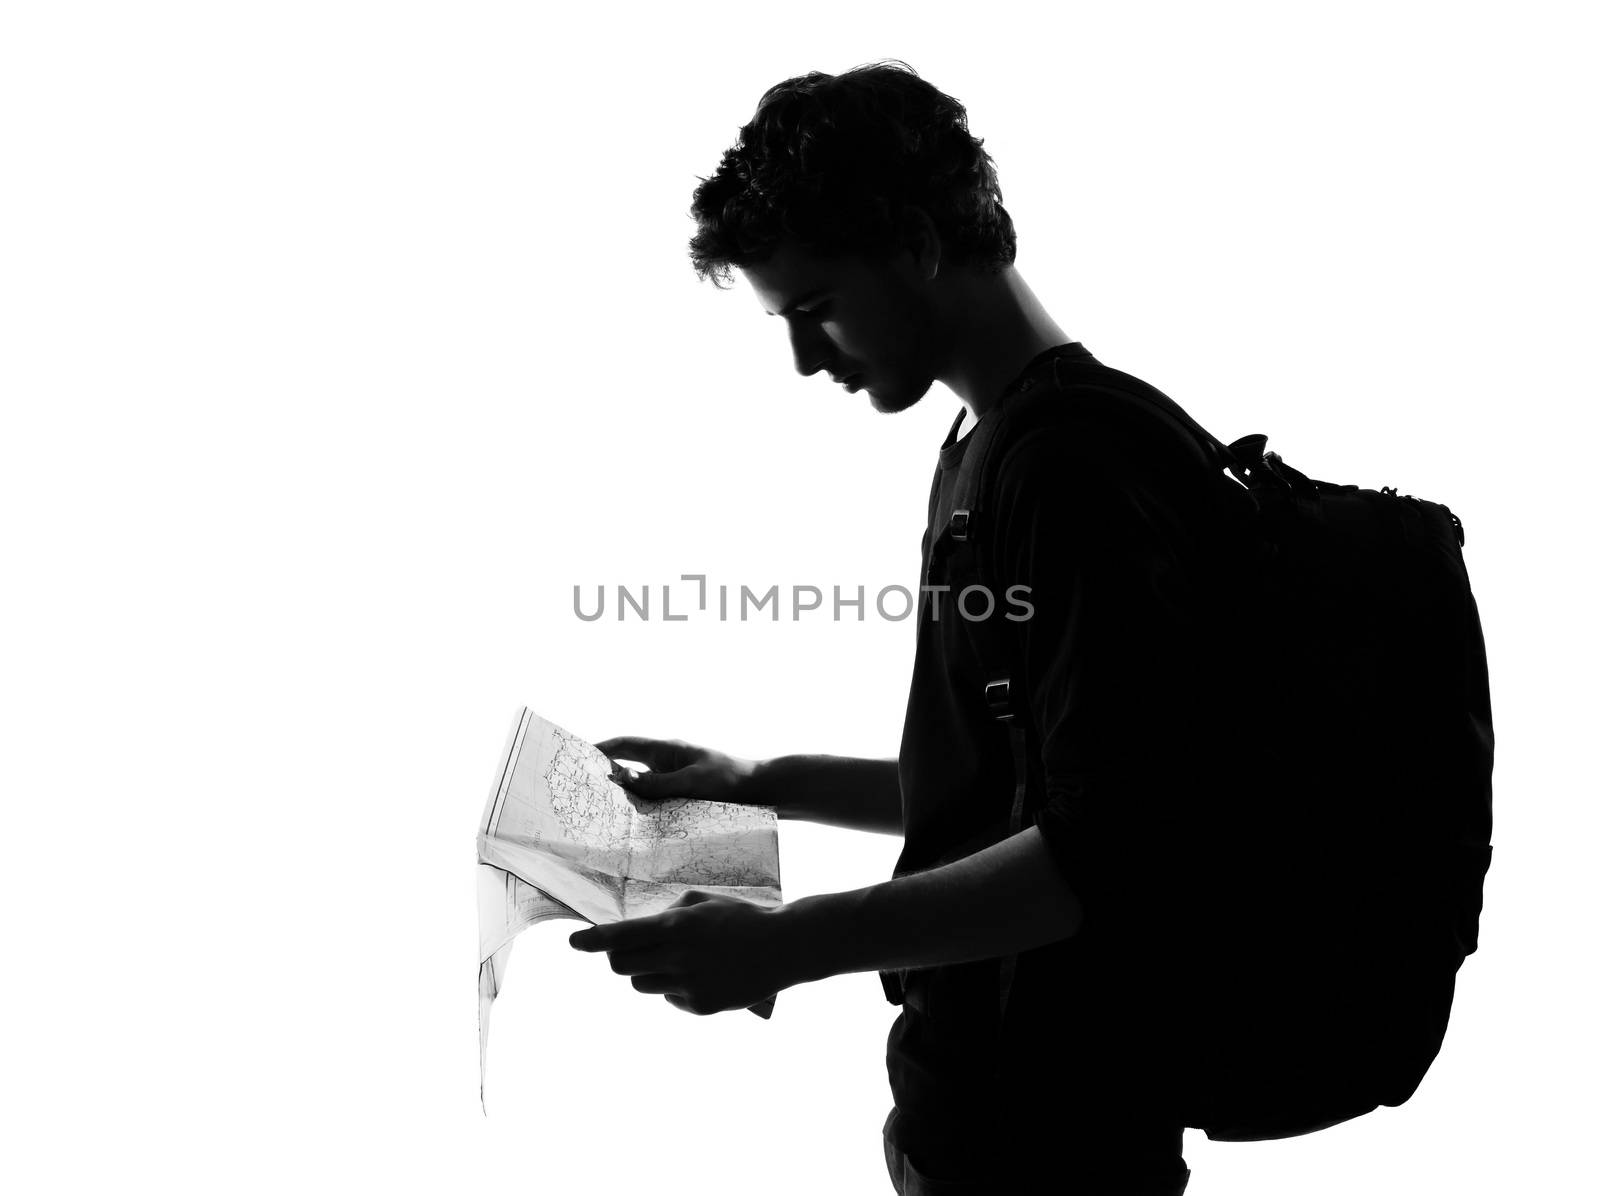 young man backpacker reading map silhouette in studio isolated on white background